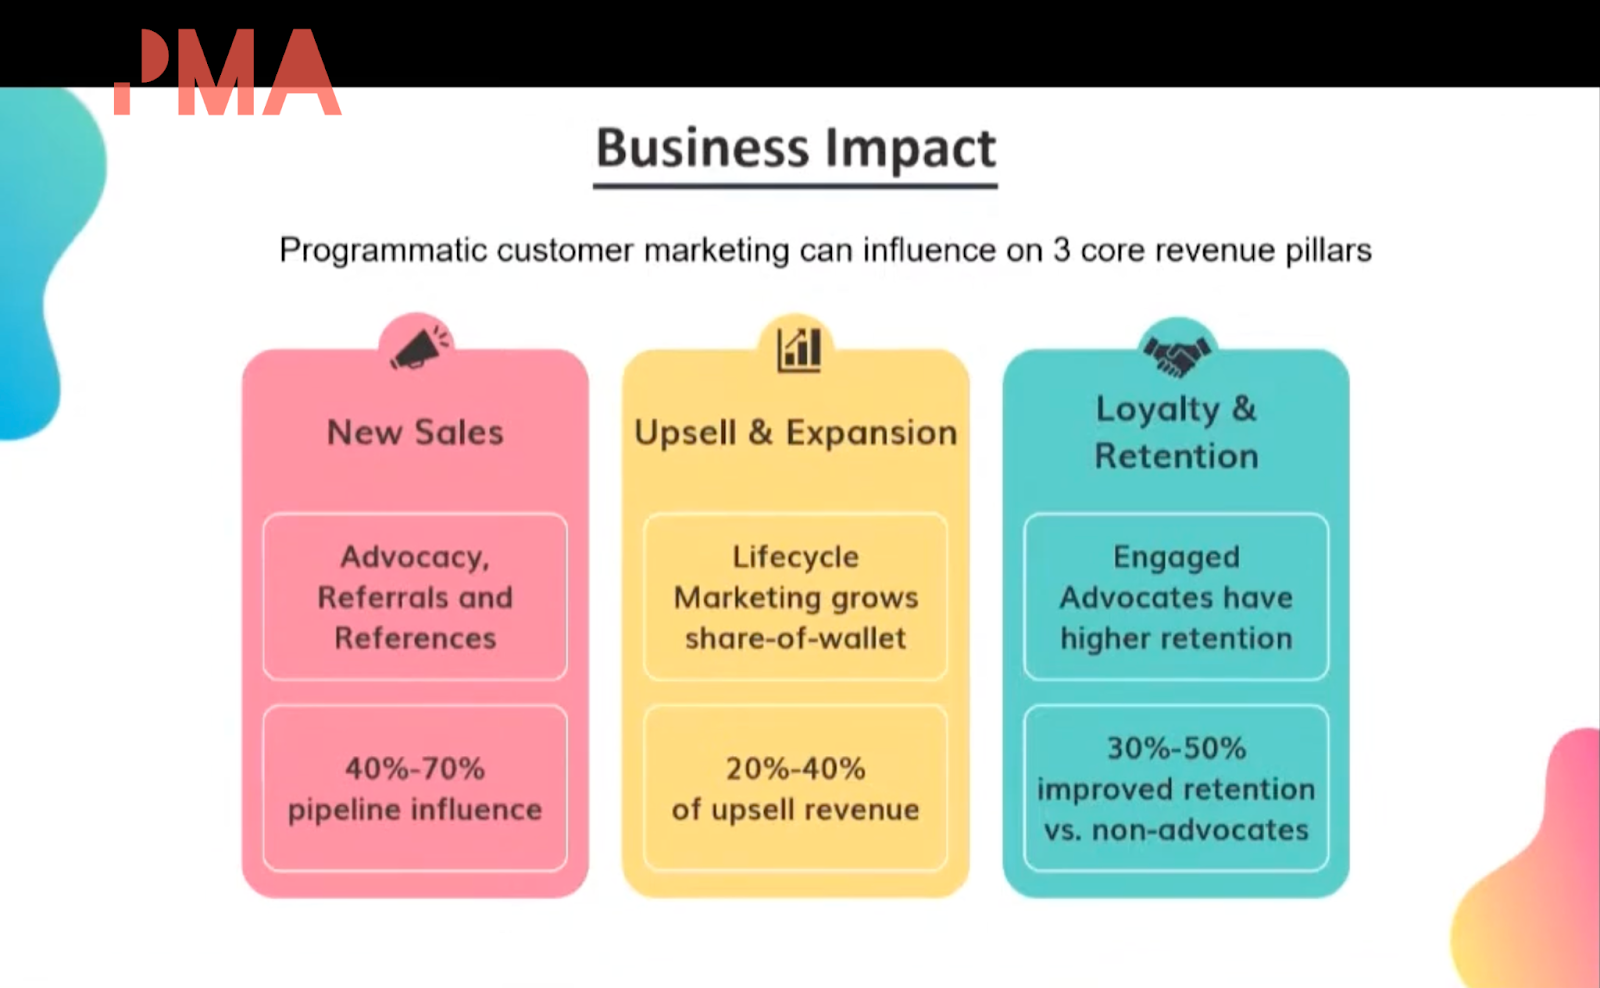 This is a screenshot showing a table with three sections: new sales, upsell & expansion, and loyalty and retention. This is referring to business impact.